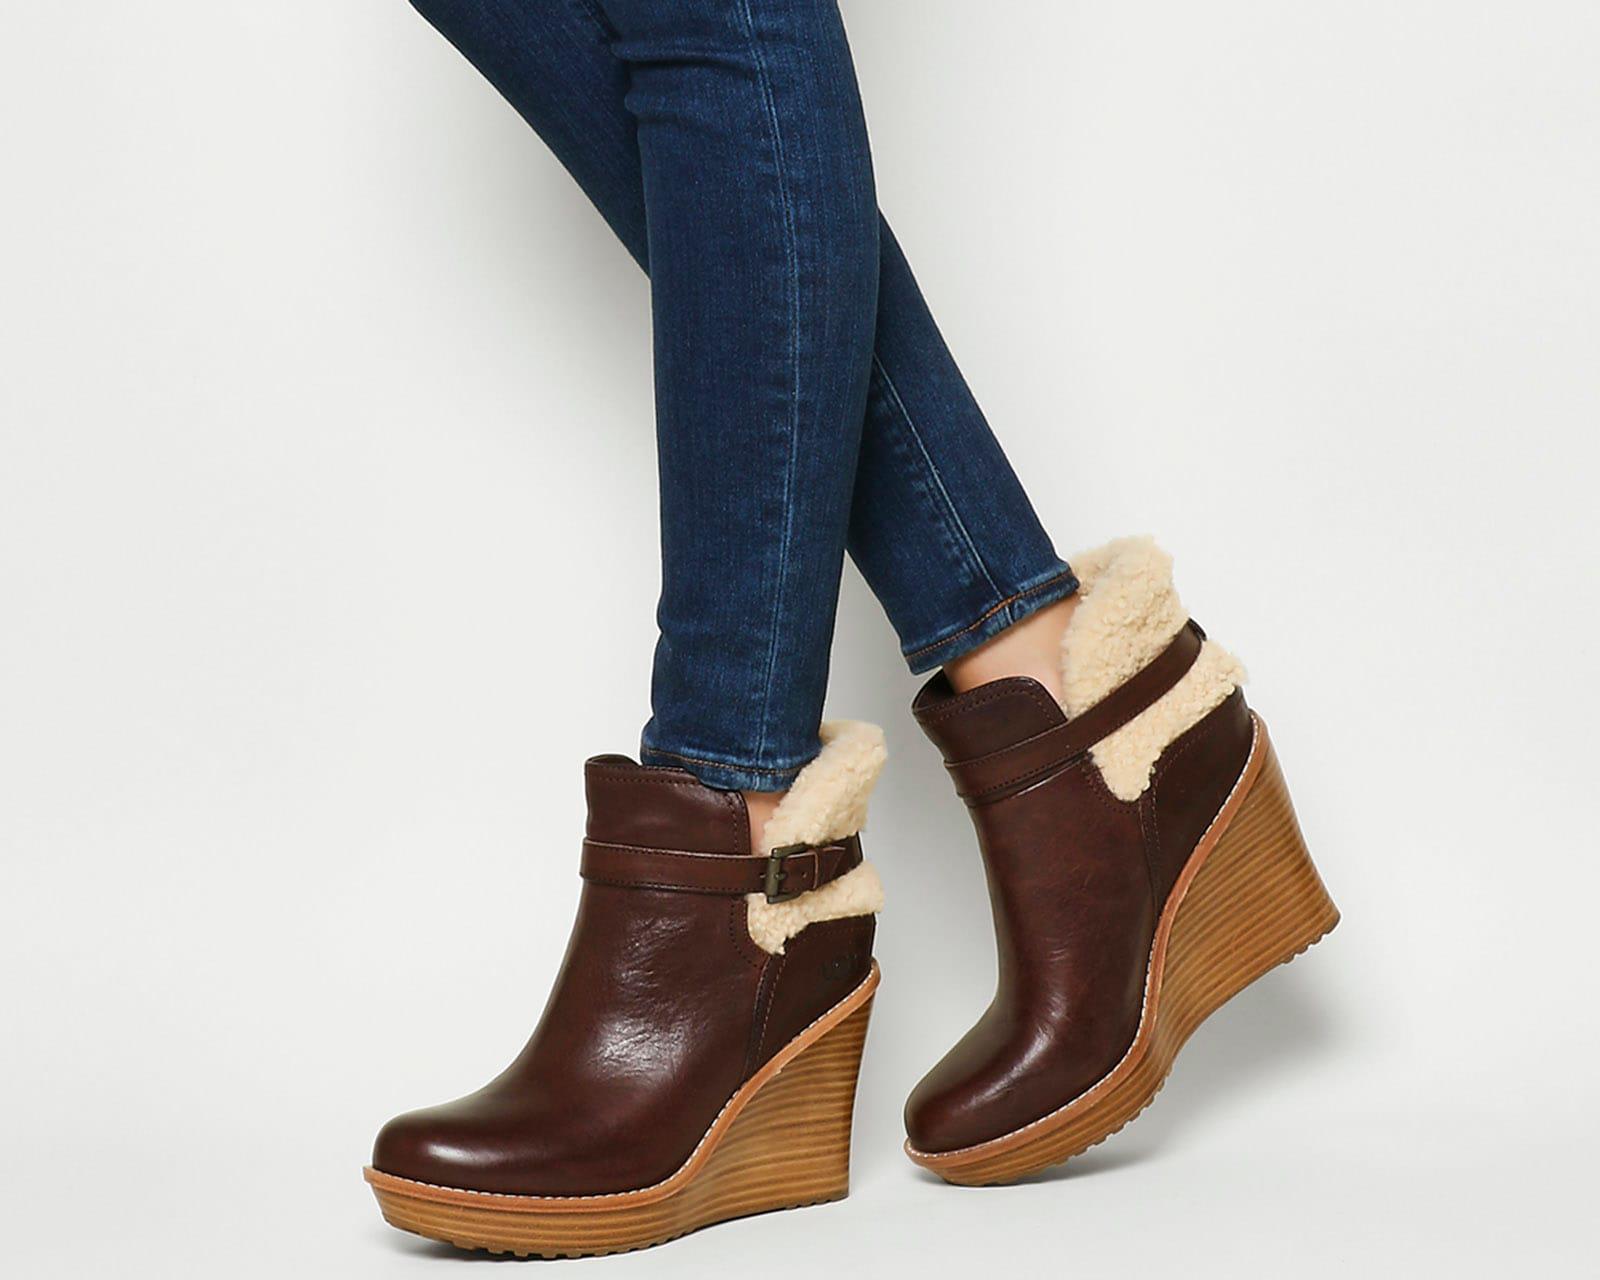 UGG Anais Wedge Ankle Boots in Mahogany 